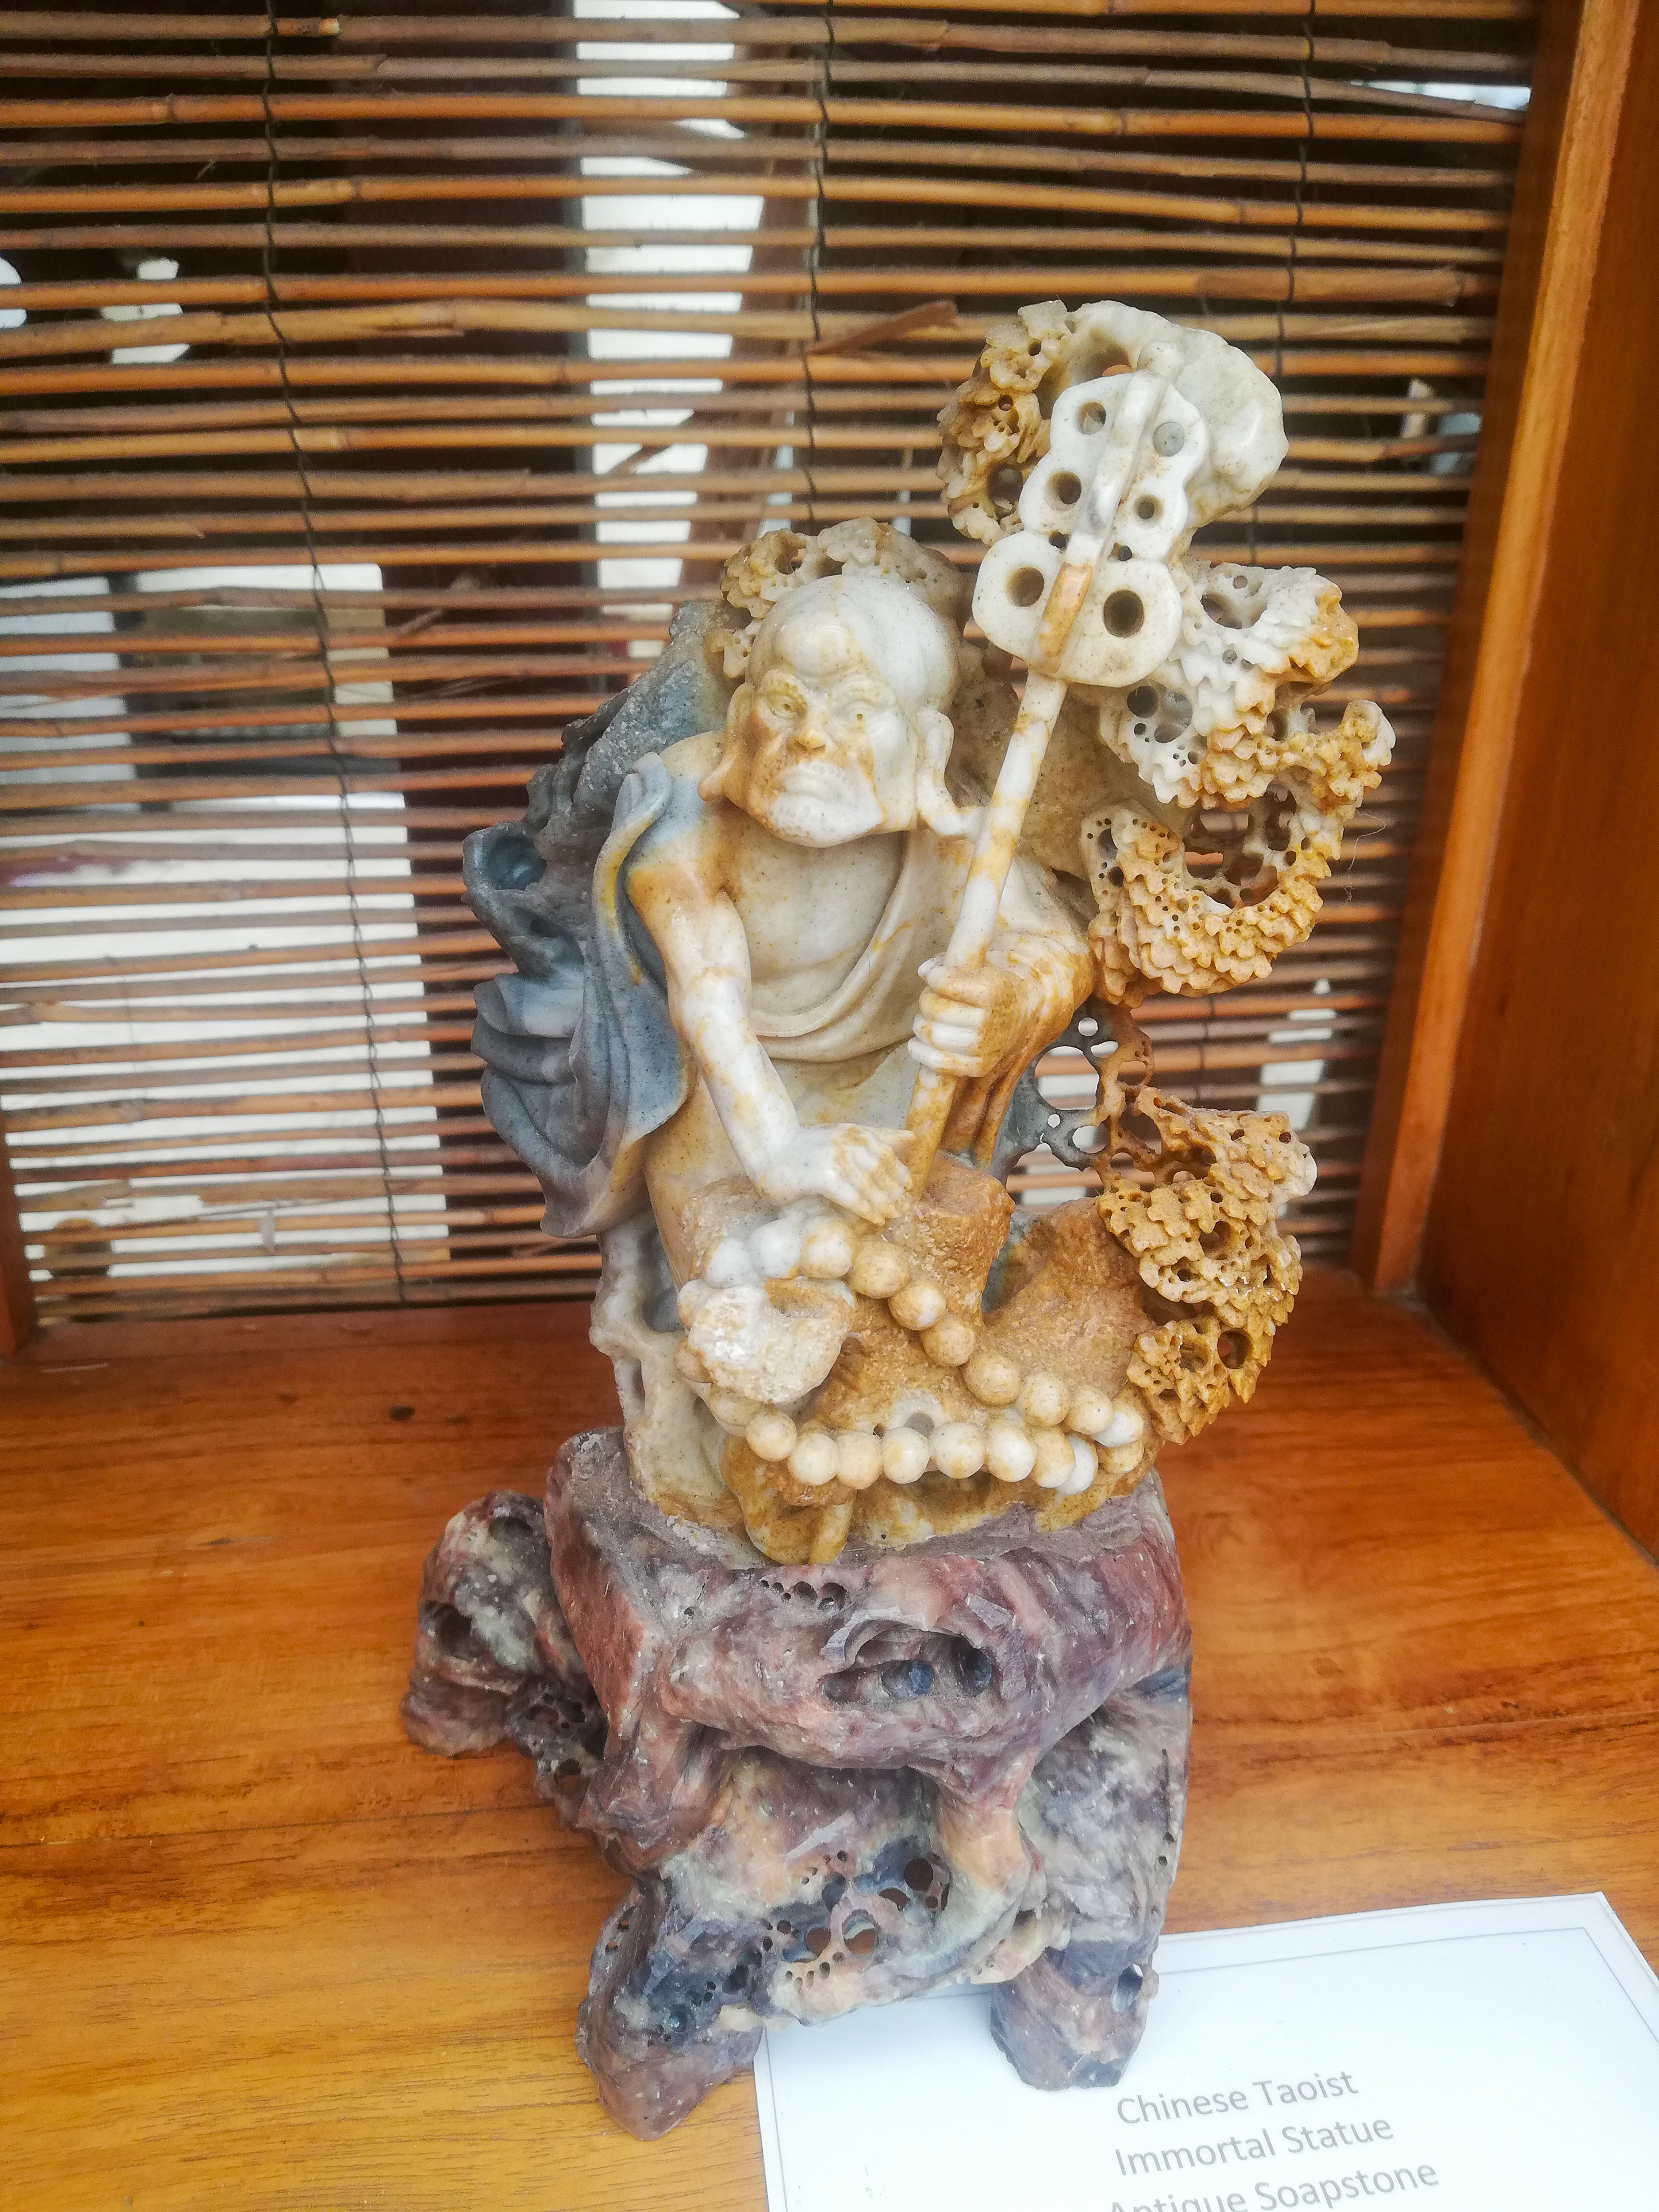 Chinese Taoist Immortal Statue Antique Soapstone <br> $1050